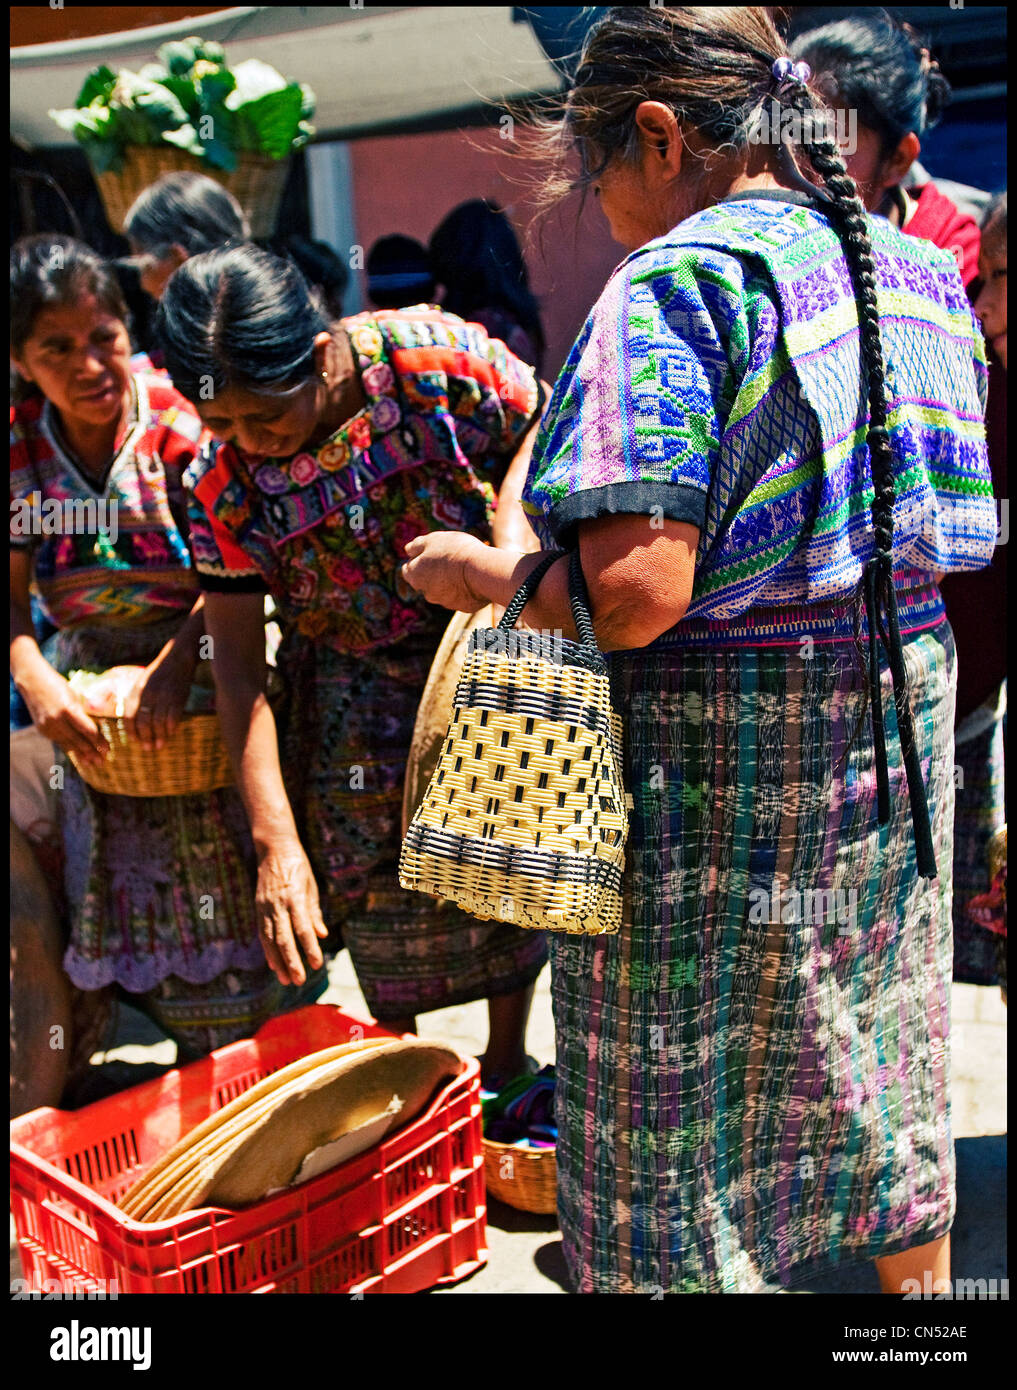 Mayan women shop for home items at the market in Comalapa. Stock Photo